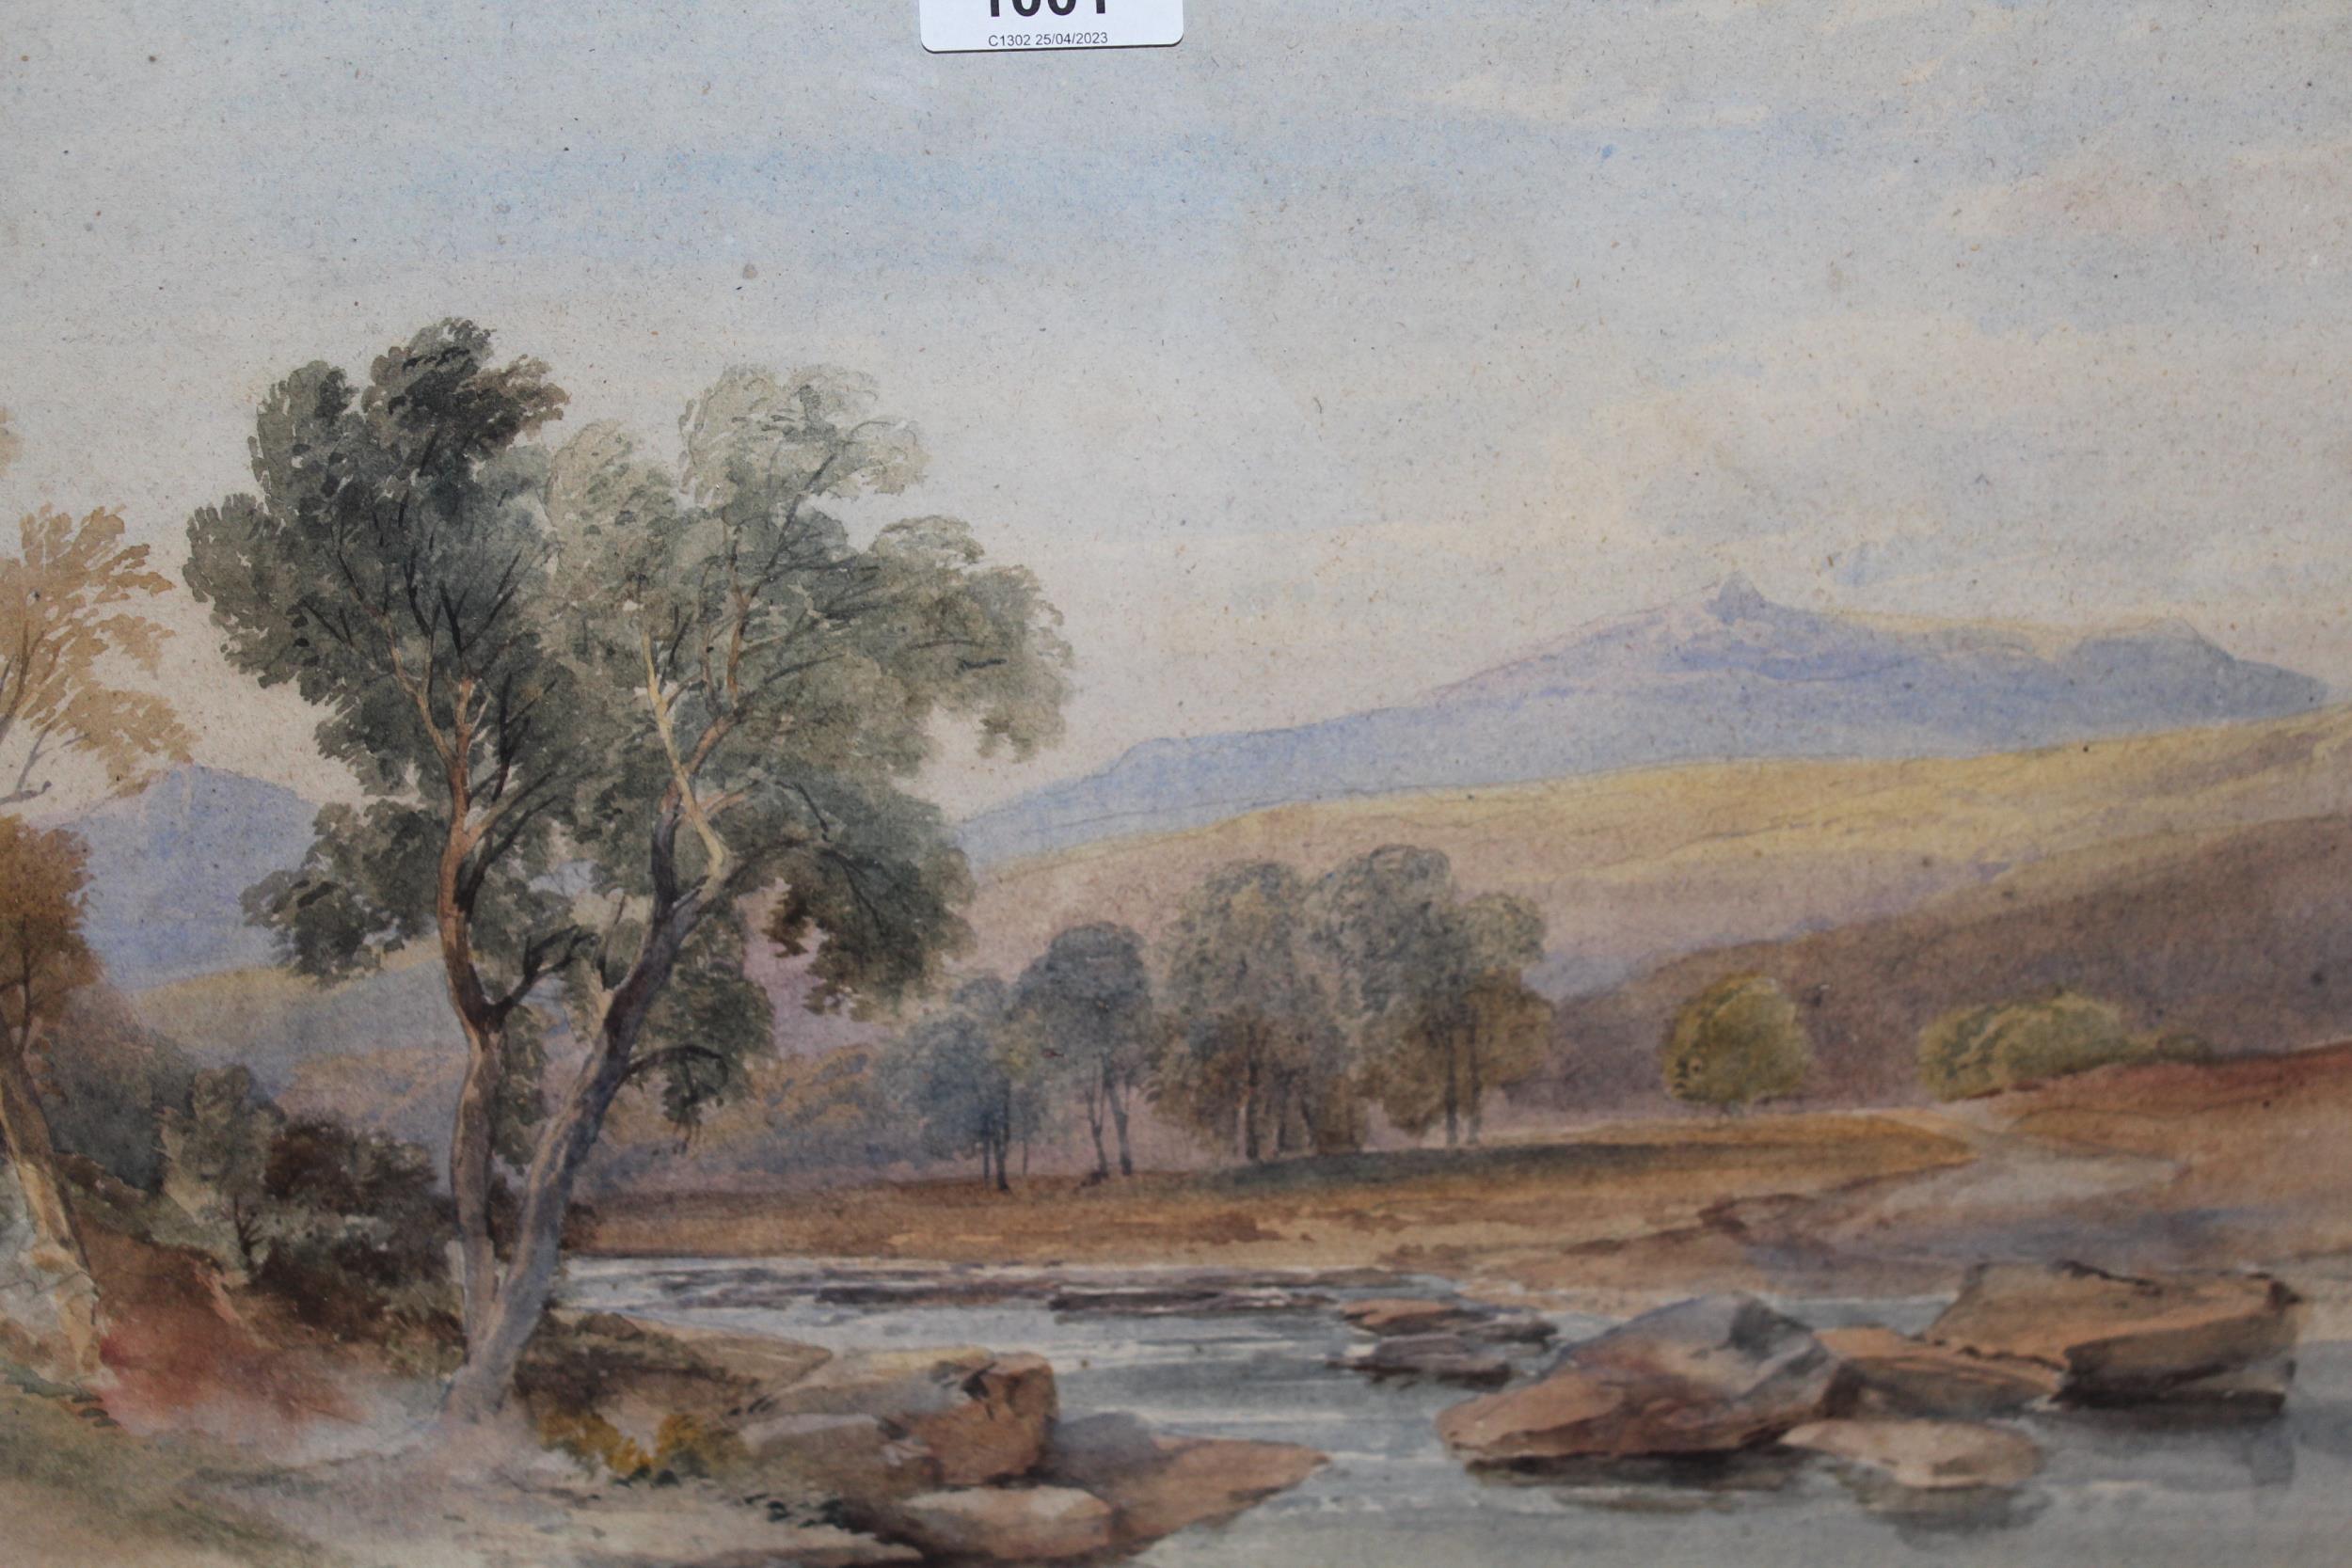 Harry Smith, 19th Century watercolour, landscape with river to the foreground bearing inscription